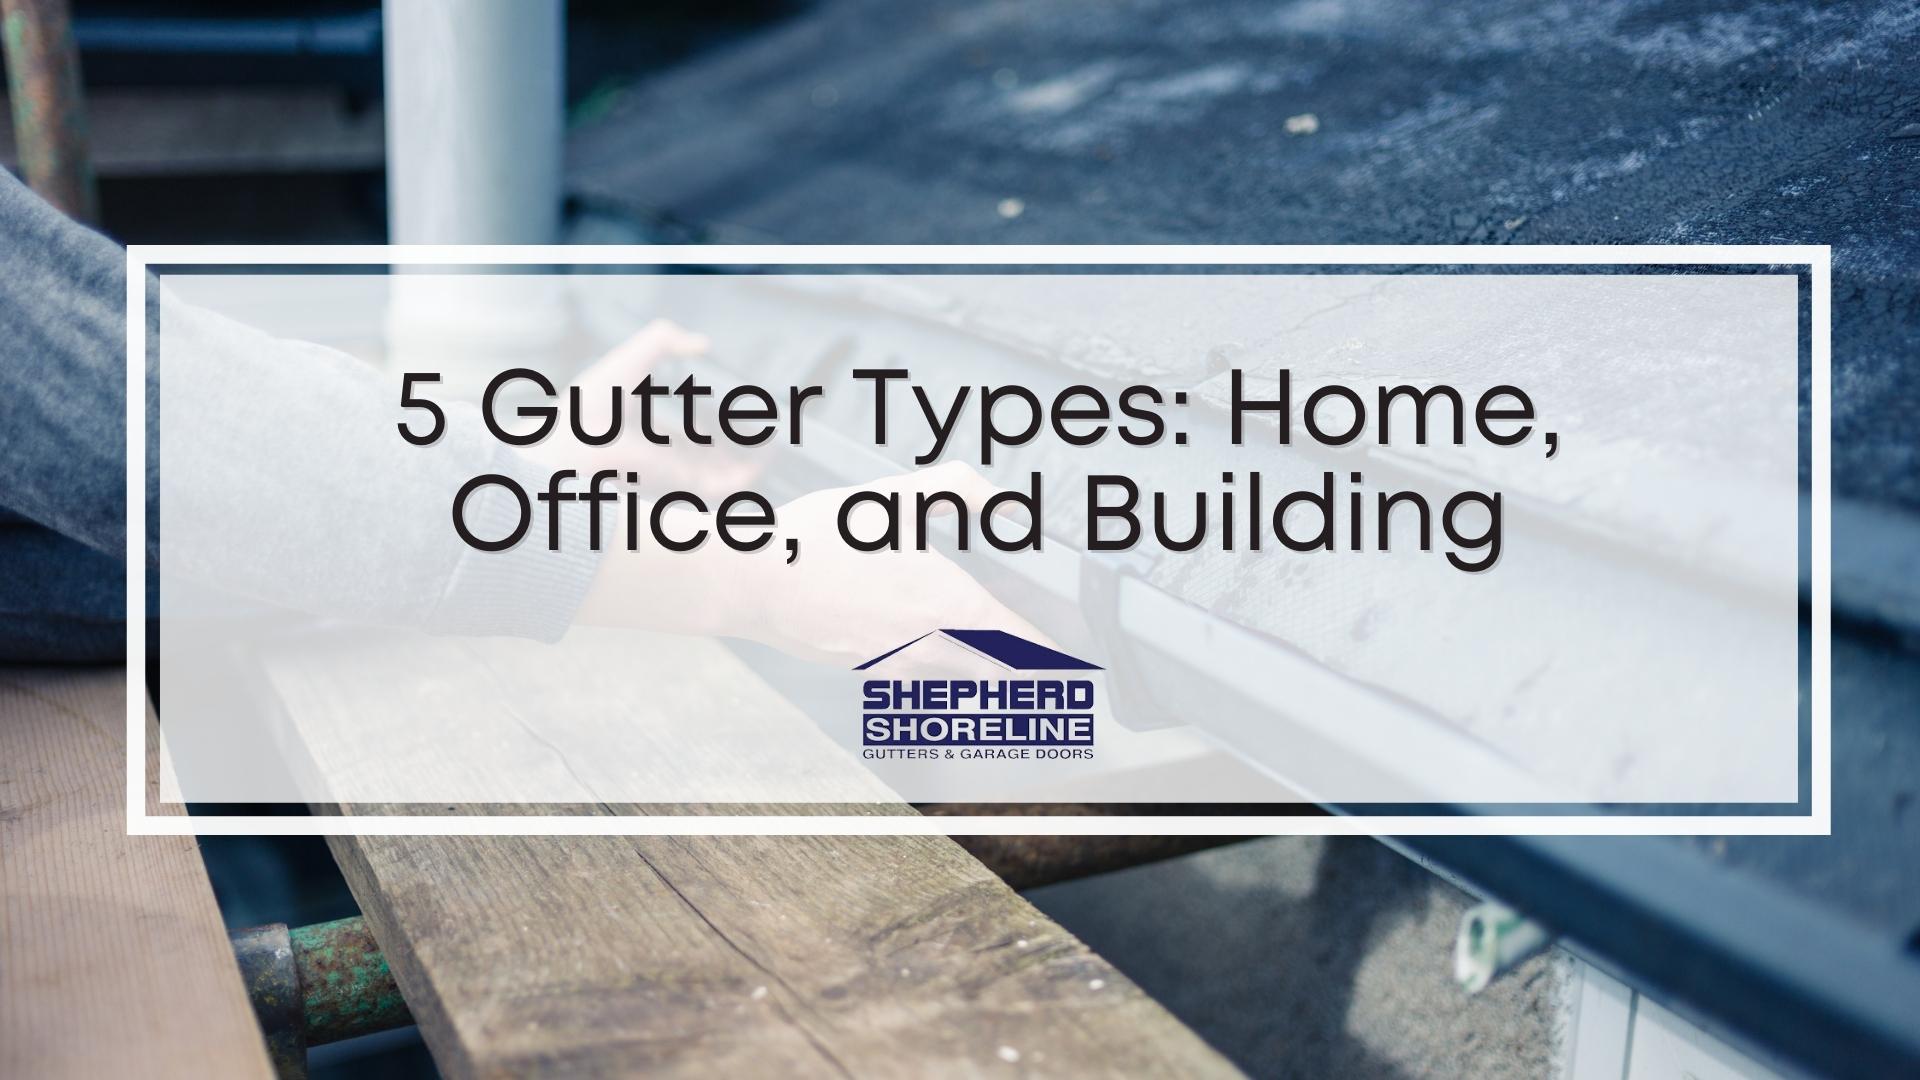 Featured image of five gutter types for every home, office, and building